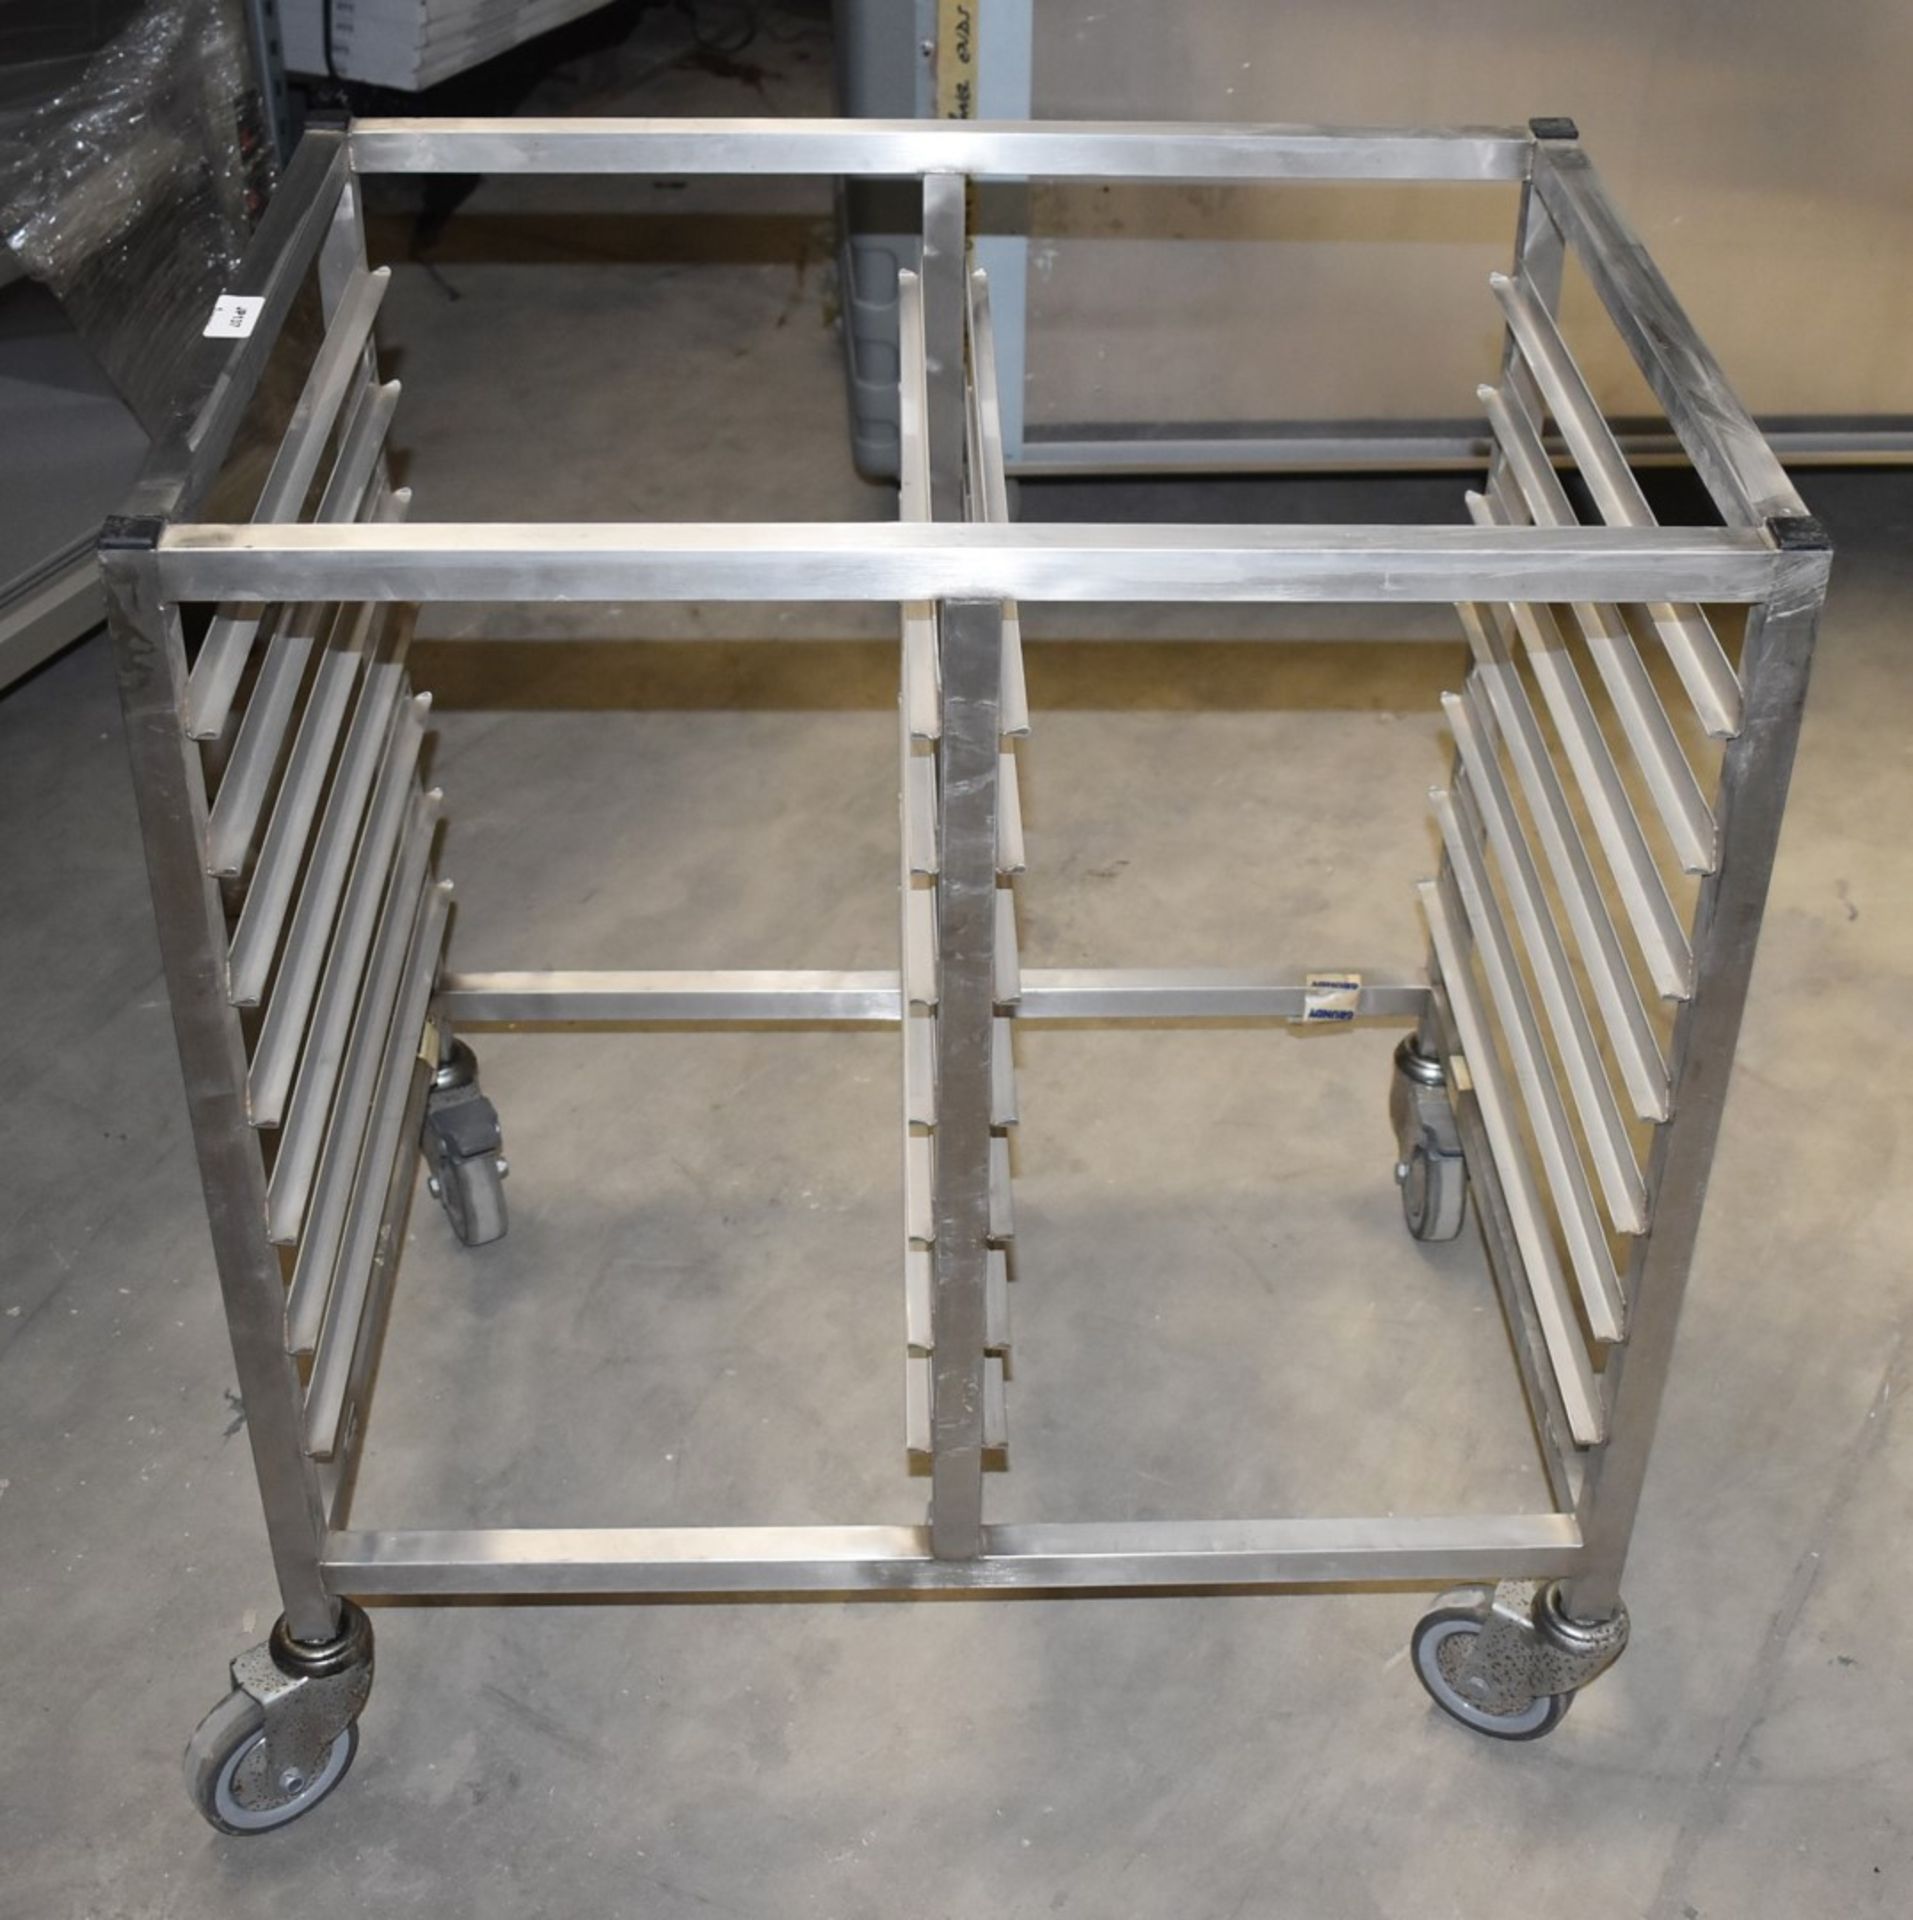 1 x Grundy Stainless Steel 14 Tier Side by Side Mobile Tray Stand - Unused - Ref JP137 WH2 - - Image 6 of 6